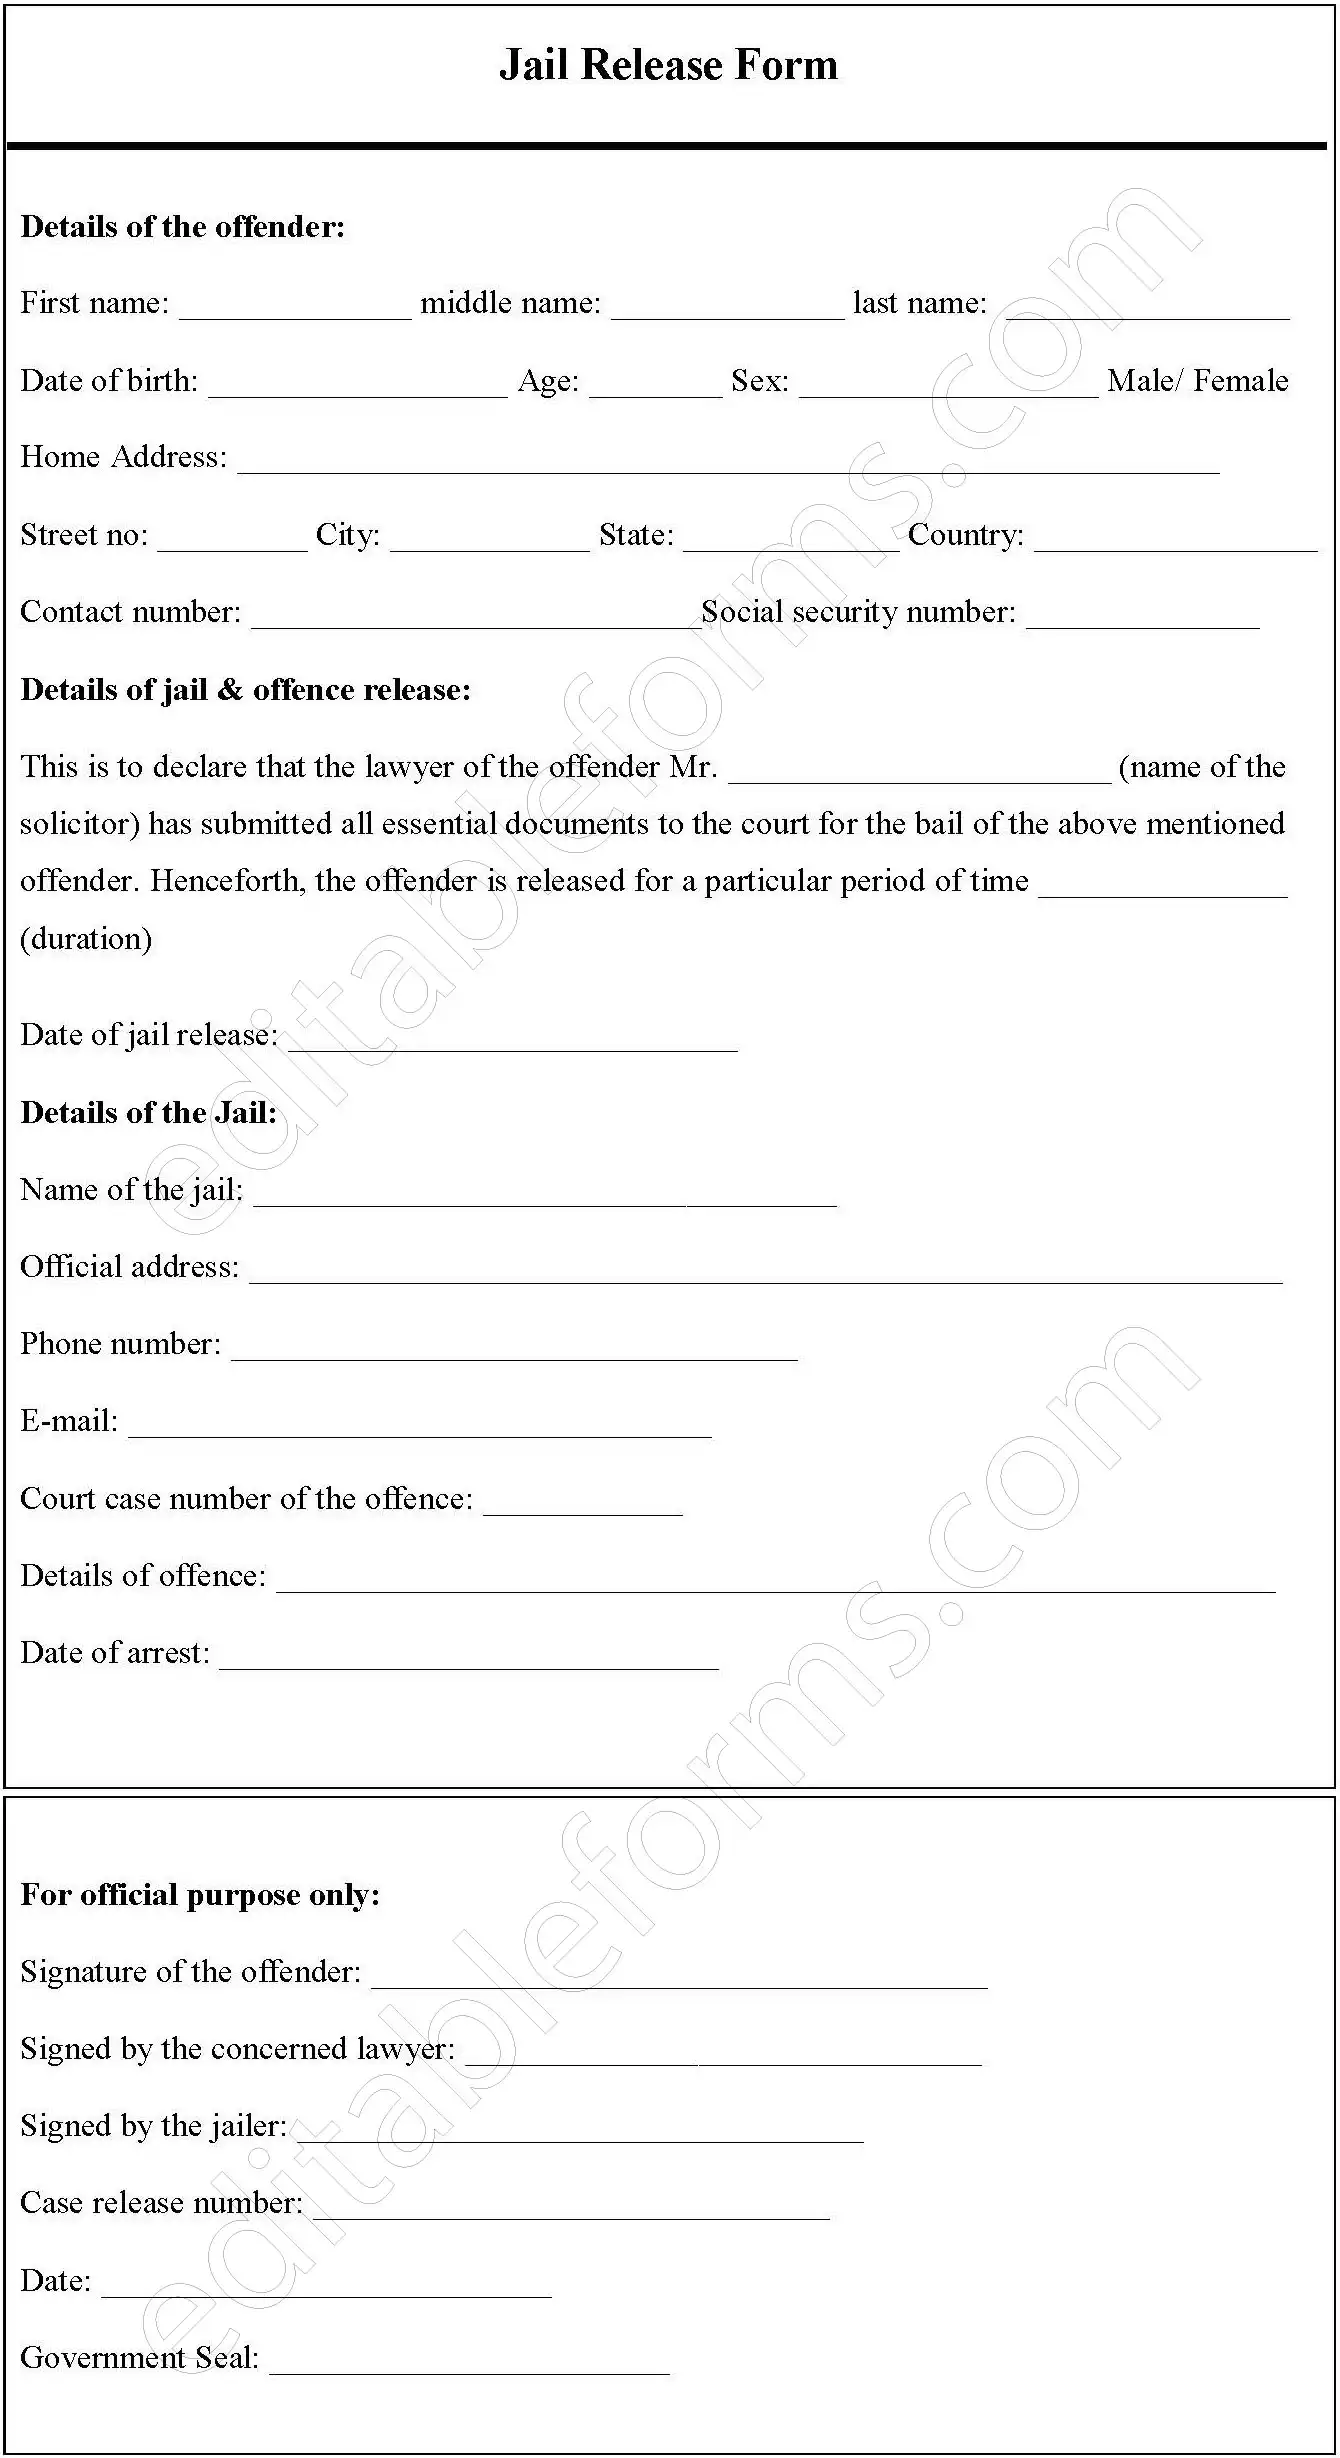 Jail Release Fillable PDF Template